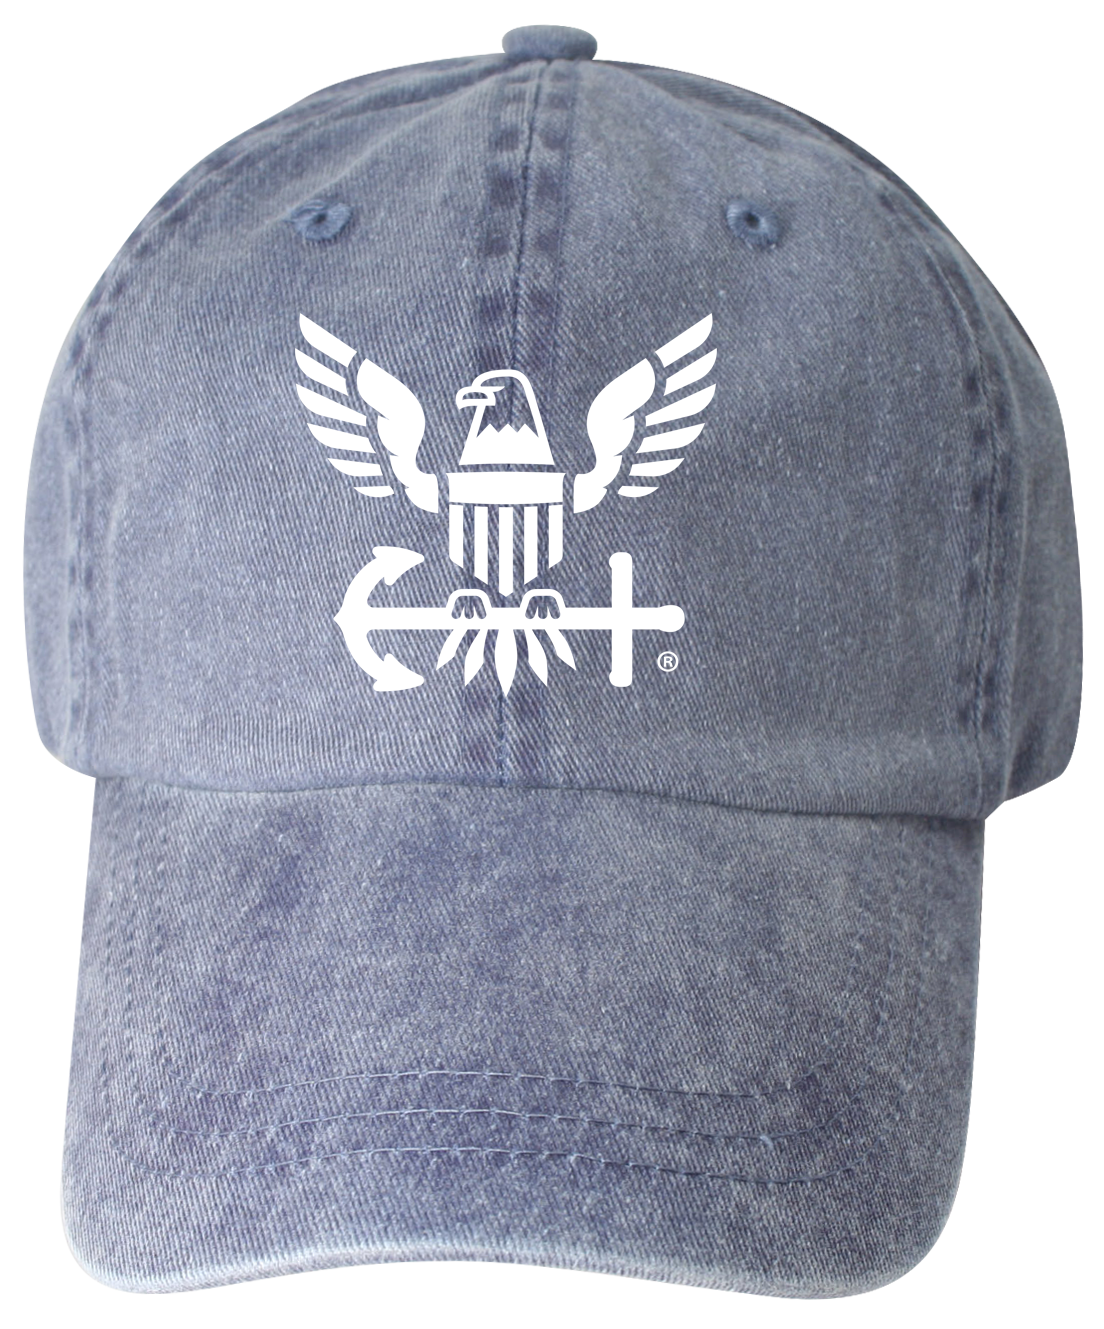 Navy Anchor and Eagle Youth Ball Cap